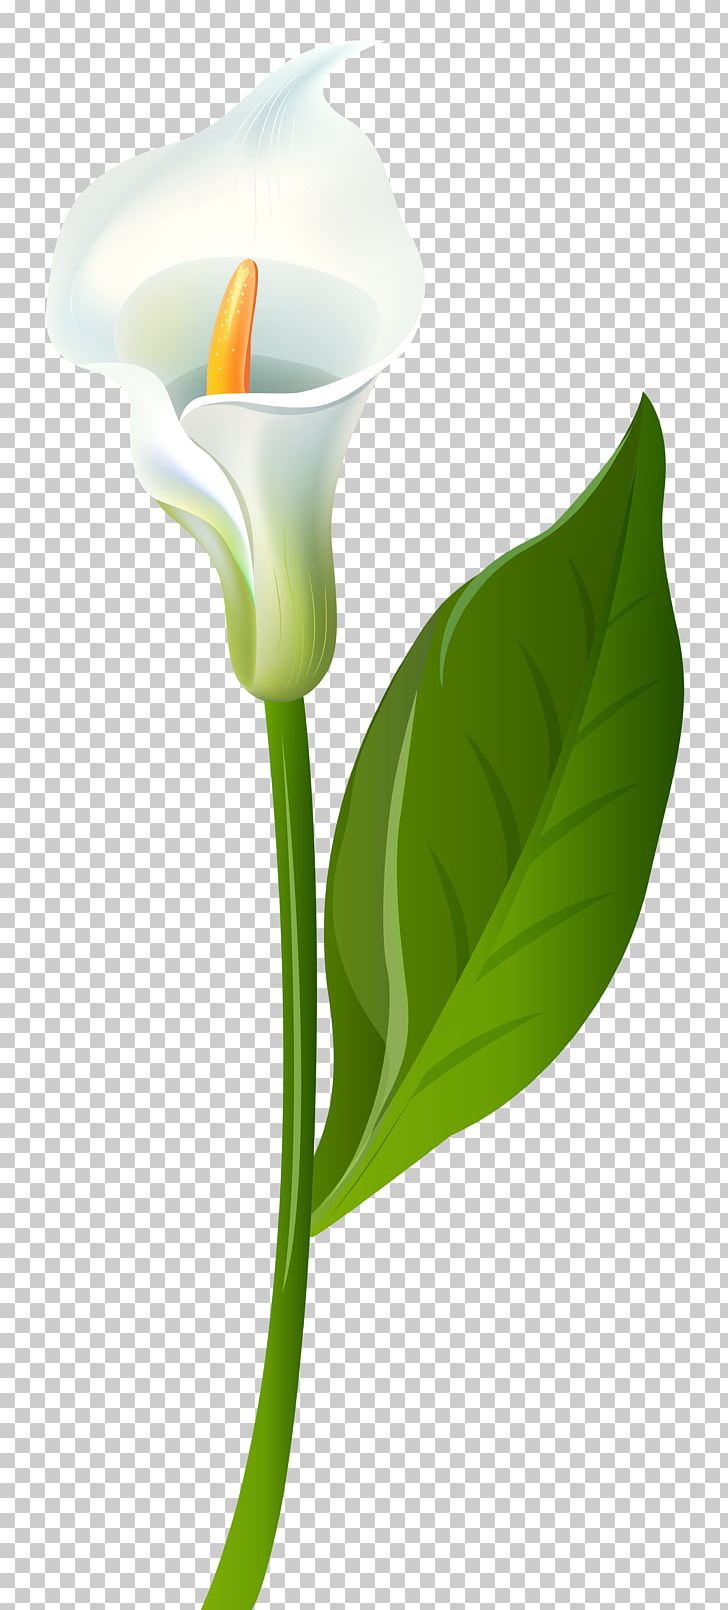 Arum-lily Lilium Flower PNG, Clipart, Arum, Arum Lily, Arumlily, Blog, Calla Lily Free PNG Download